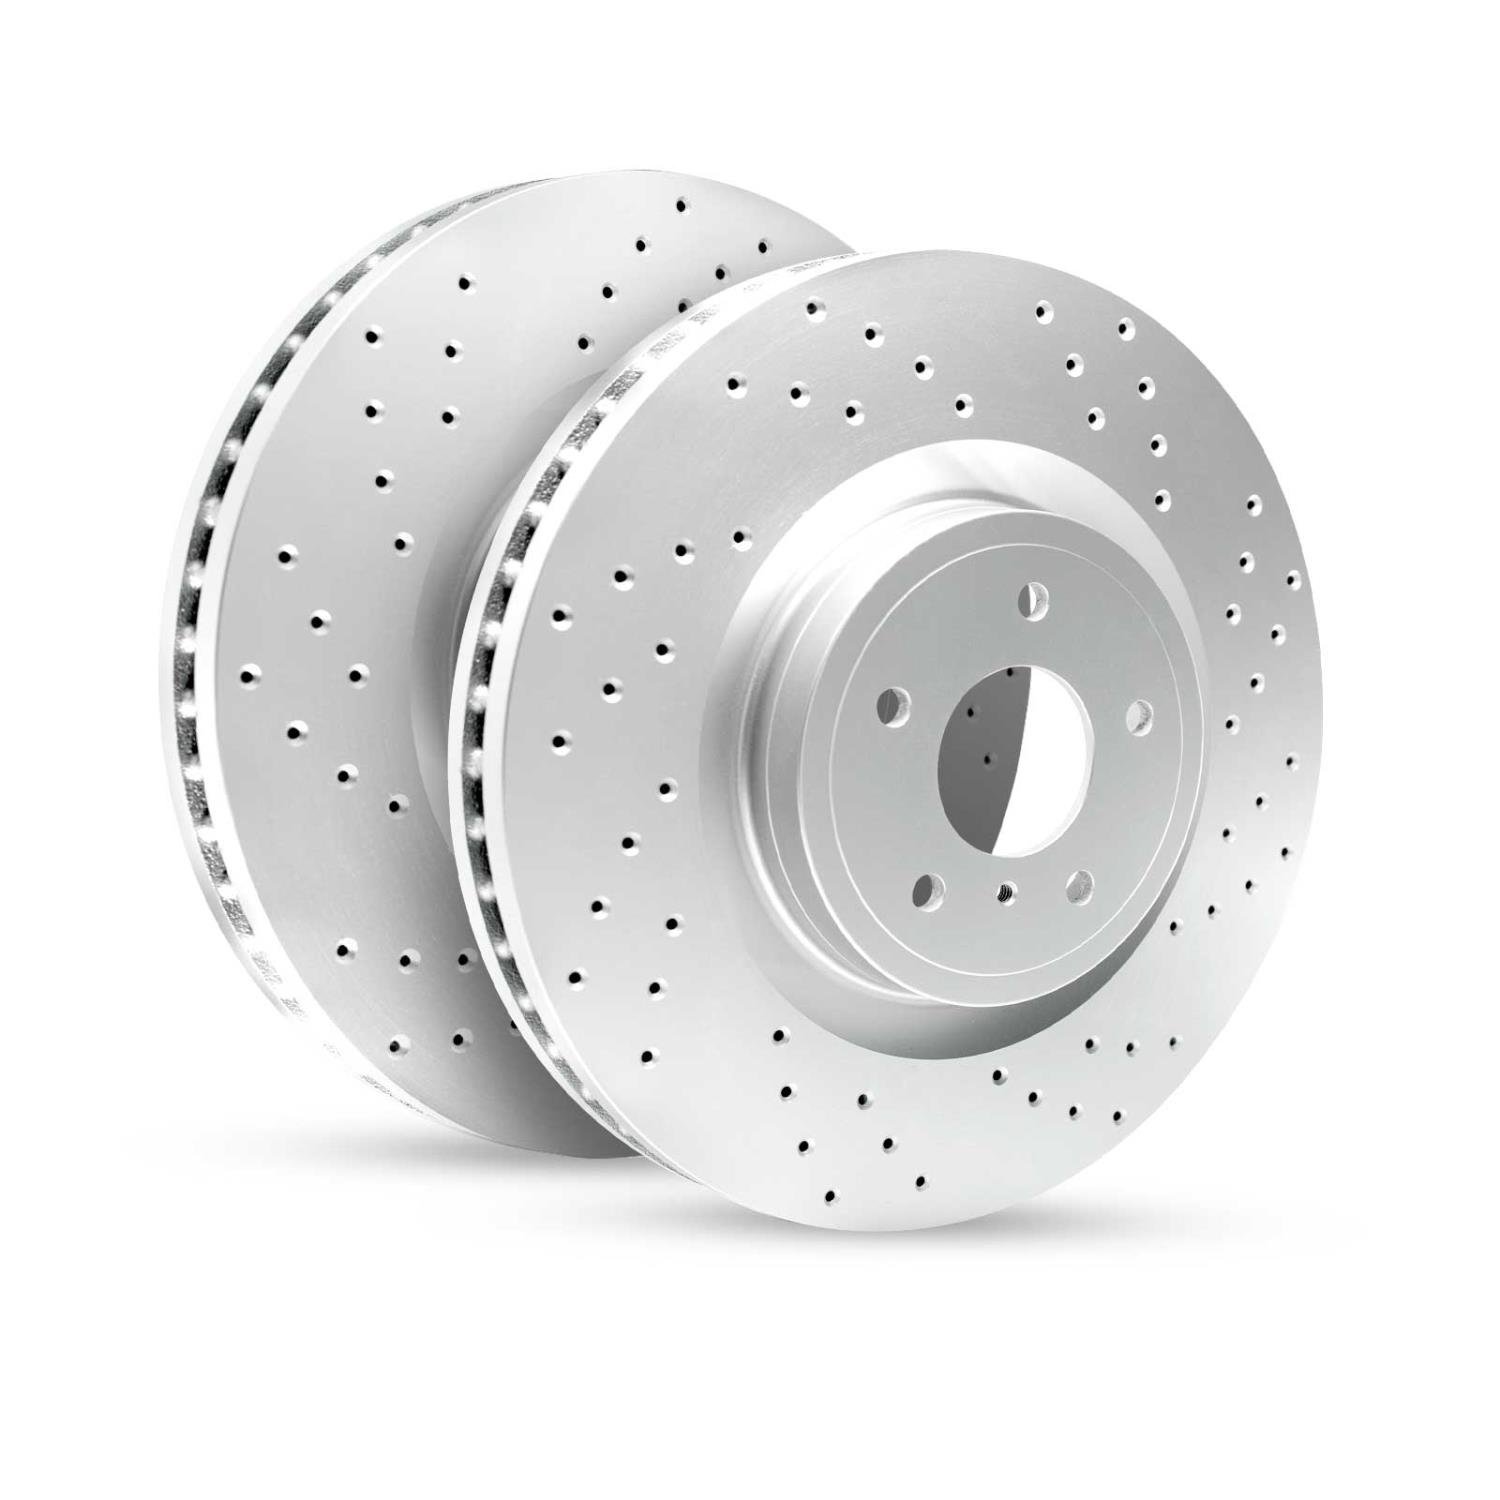 GEO-Carbon Drilled/Slotted Rotors, 1998-2002 Acura/Honda,